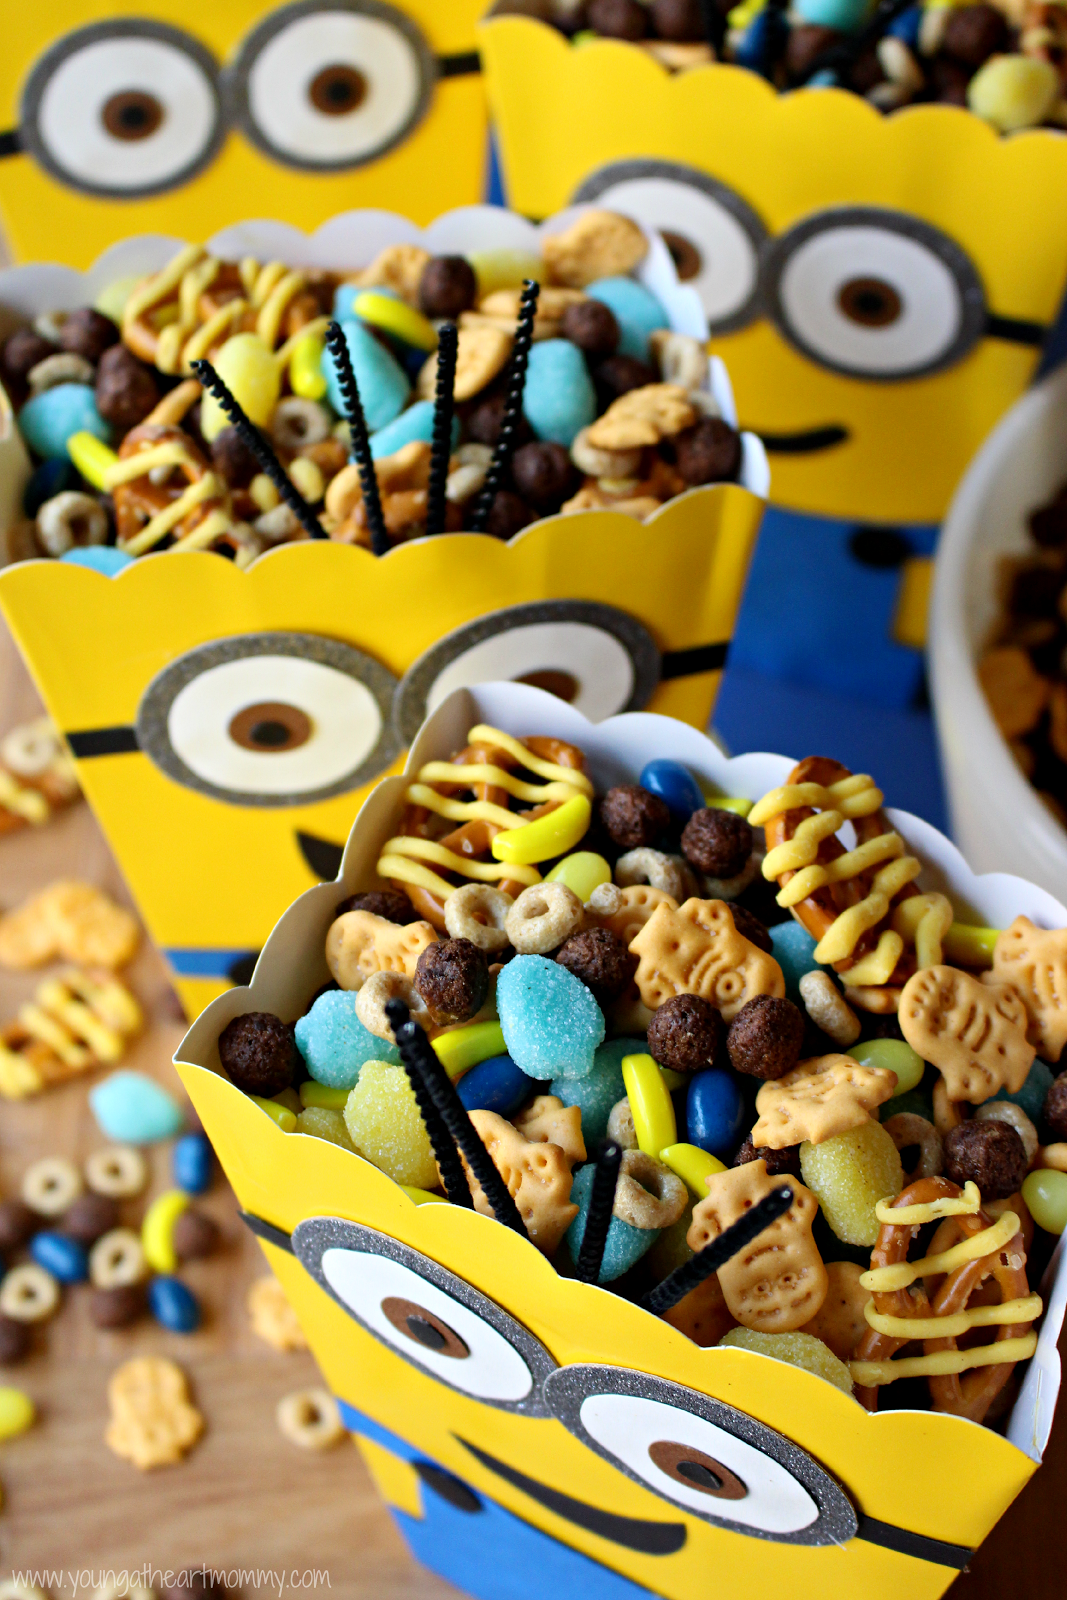 This Despicable Me Minion Munchies Snack Mix is sweet, salty, and loaded with yummy treats for your next family movie night!